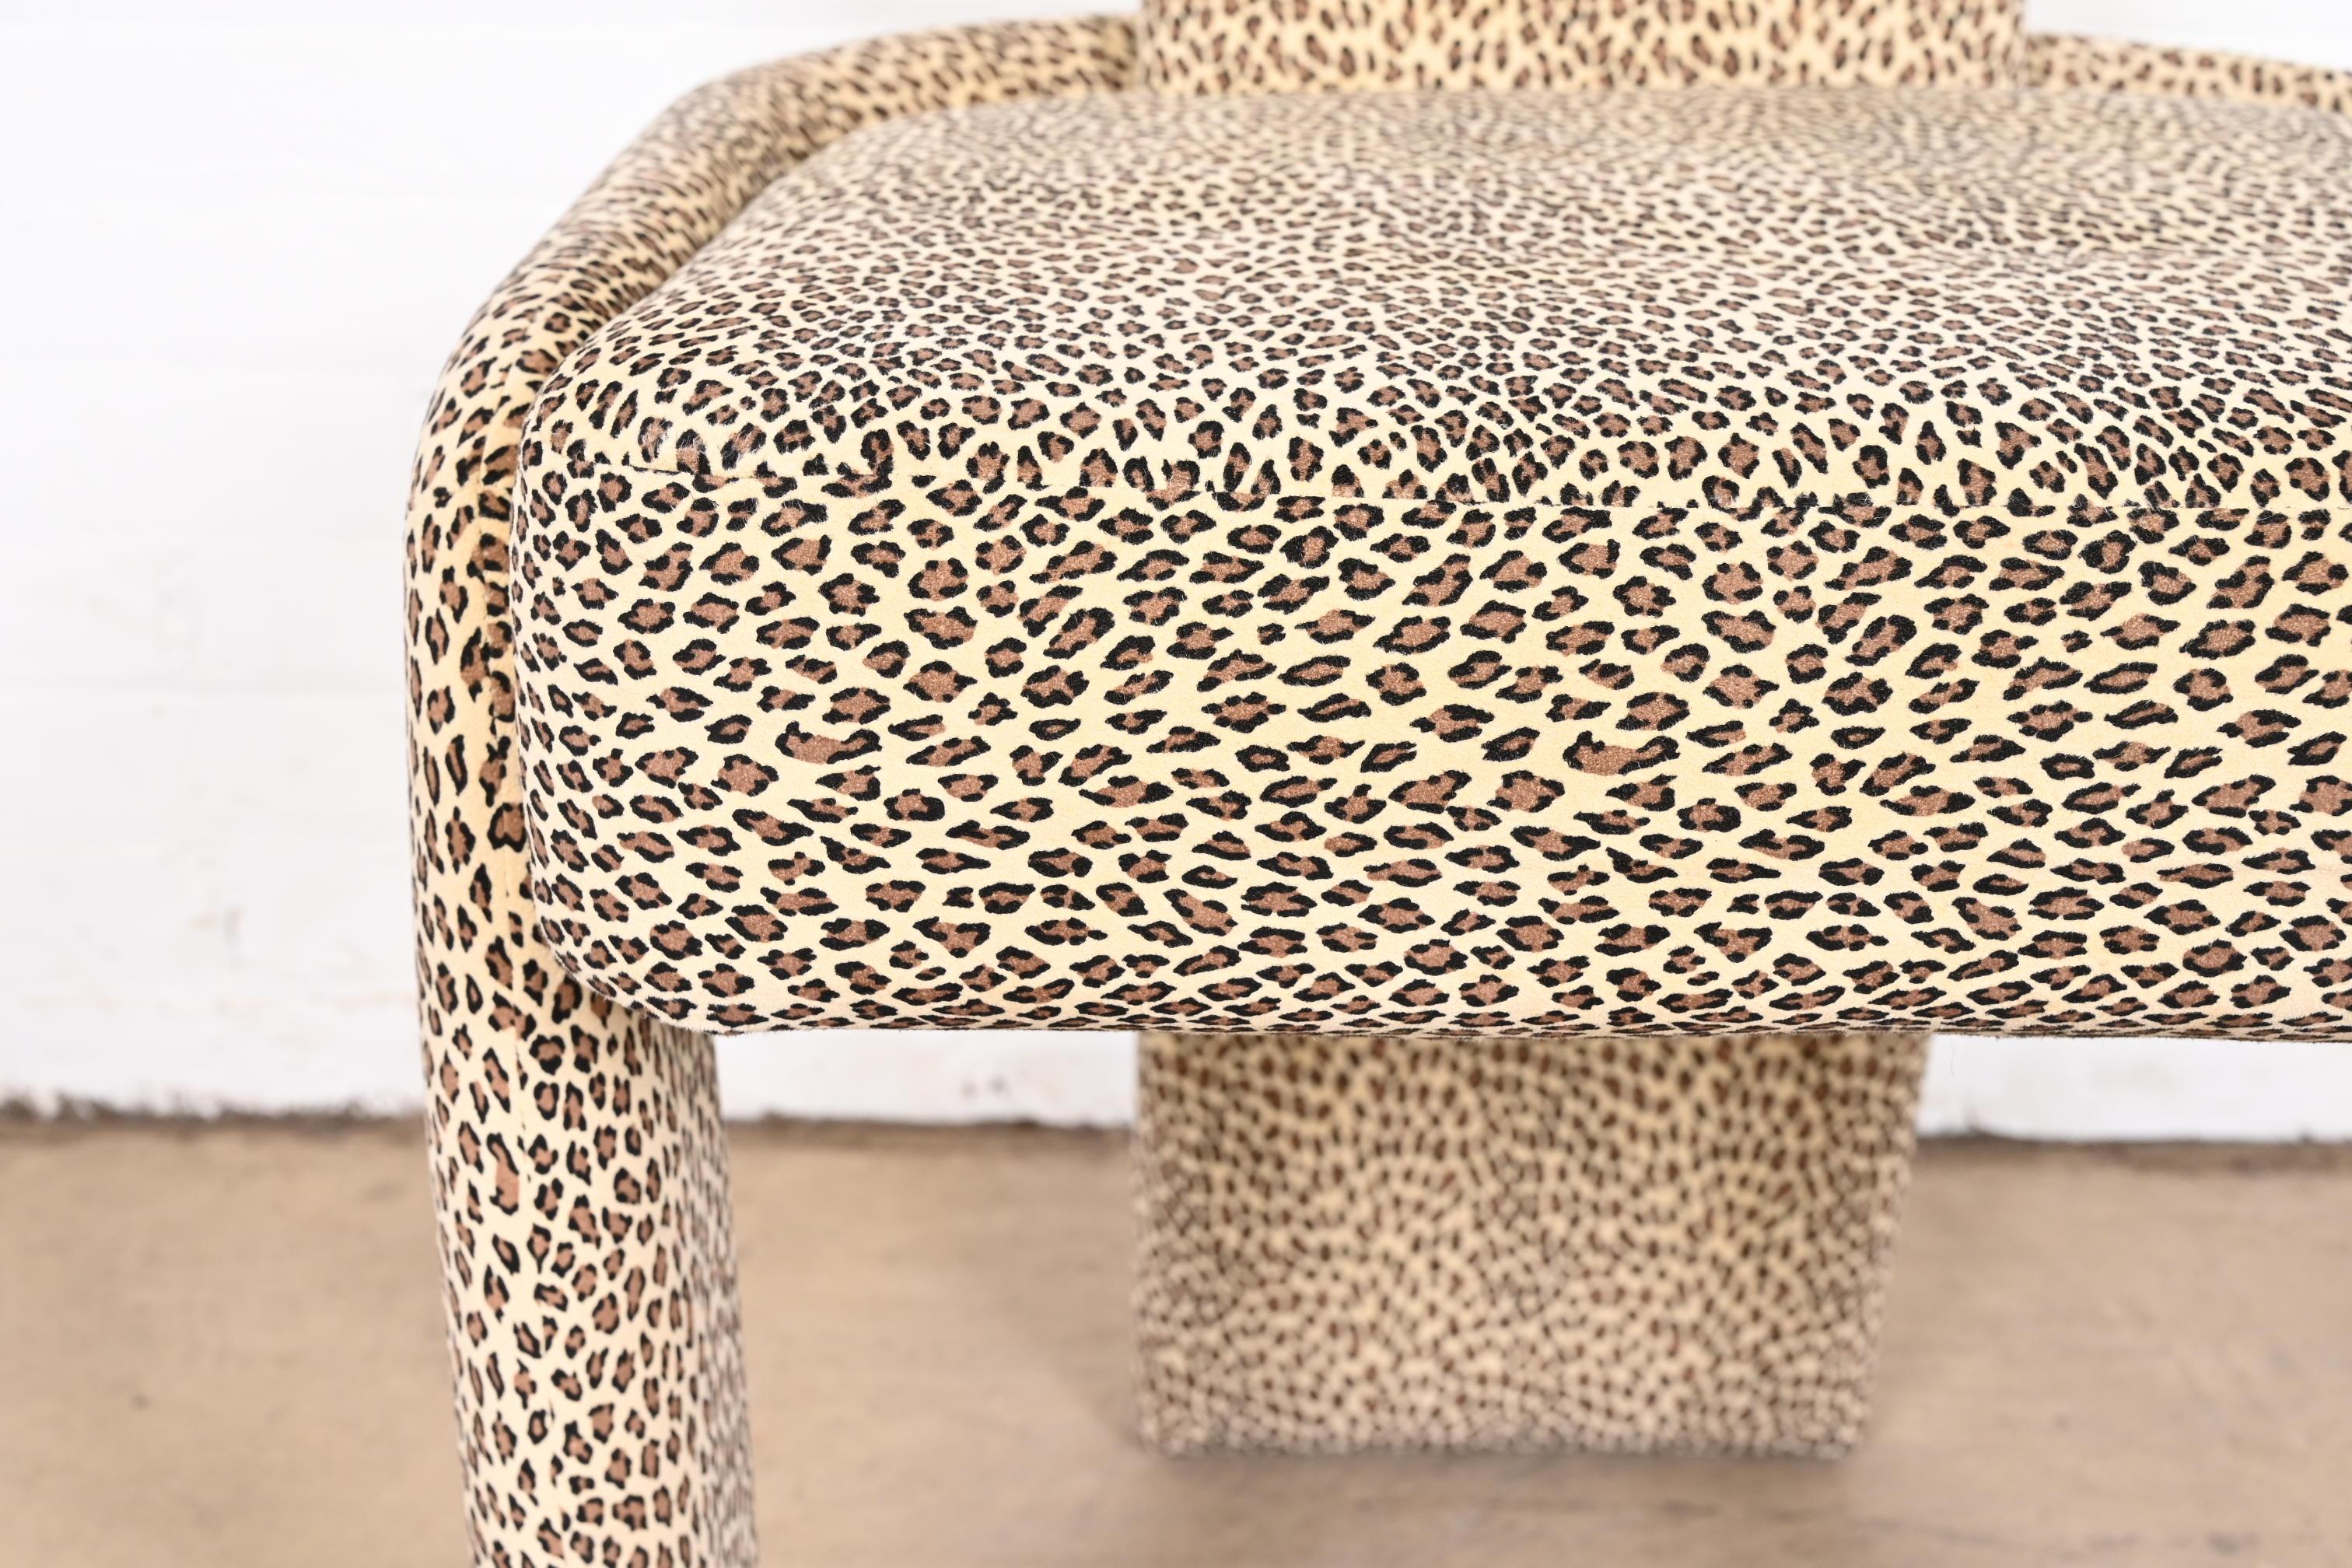 Pierre Cardin Leopard Print Upholstered High Back Dining Chairs, Set of Six For Sale 3